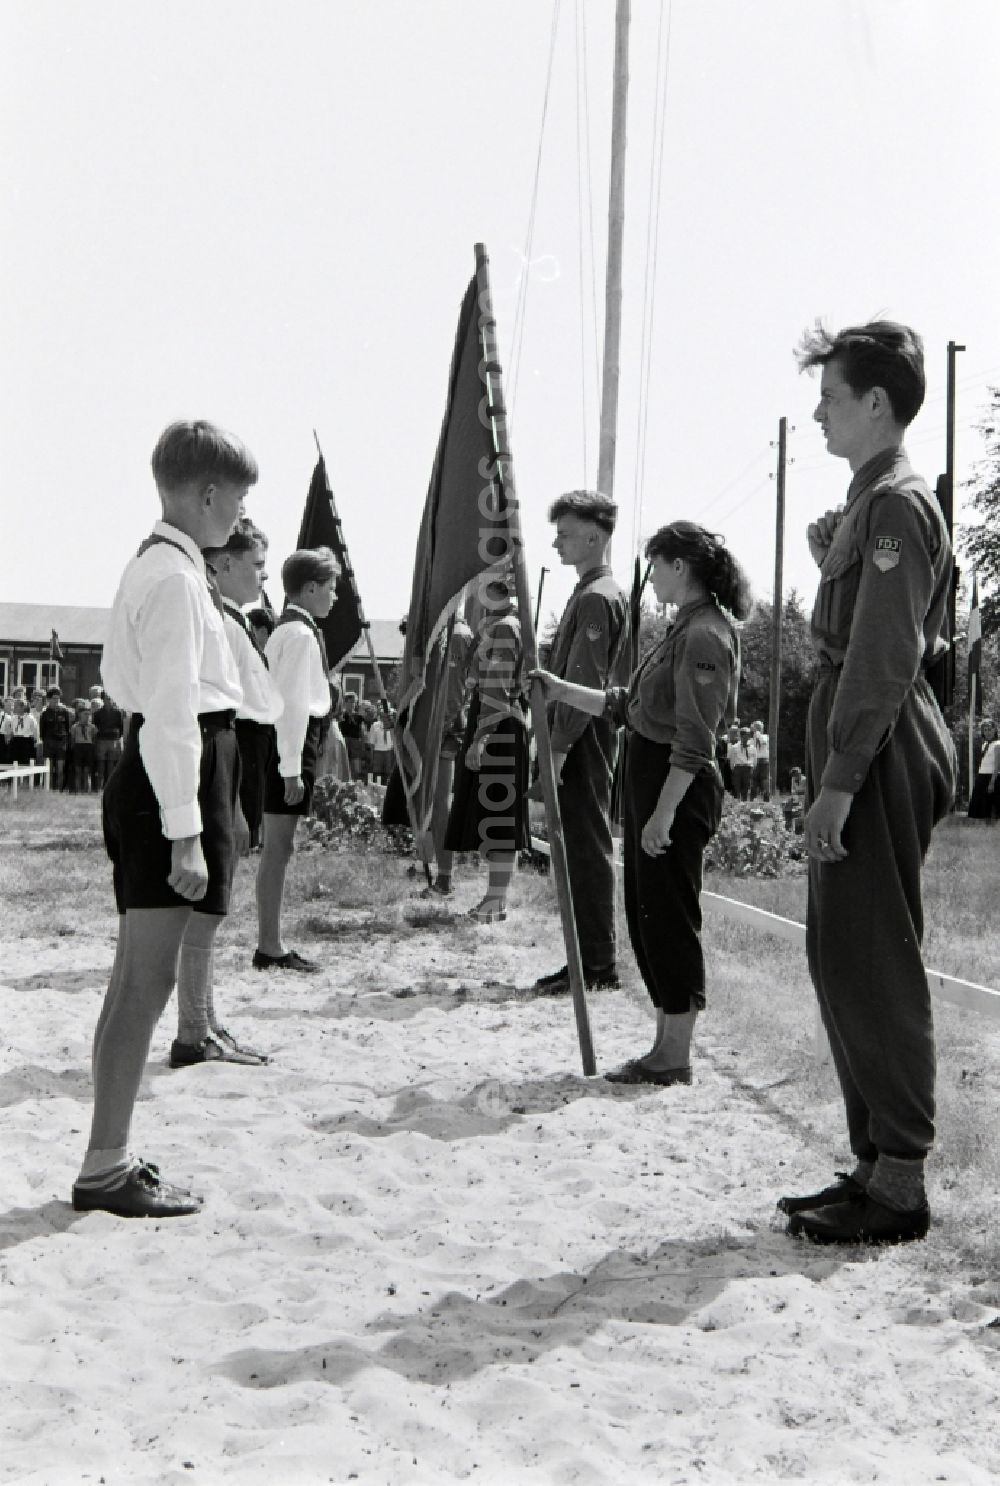 GDR image archive: Prerow - Summer camp operation with pupils and teenagers in the summer camp Kim Ir Sen of the pioneer organization Ernst Thaelmann in Prerow in the state Mecklenburg-Western Pomerania on the territory of the former GDR, German Democratic Republic. With homemade phantasy uniforms and pre-military drill and ante-exercises, the communist tradition was commemorated in the Spanish Civil War